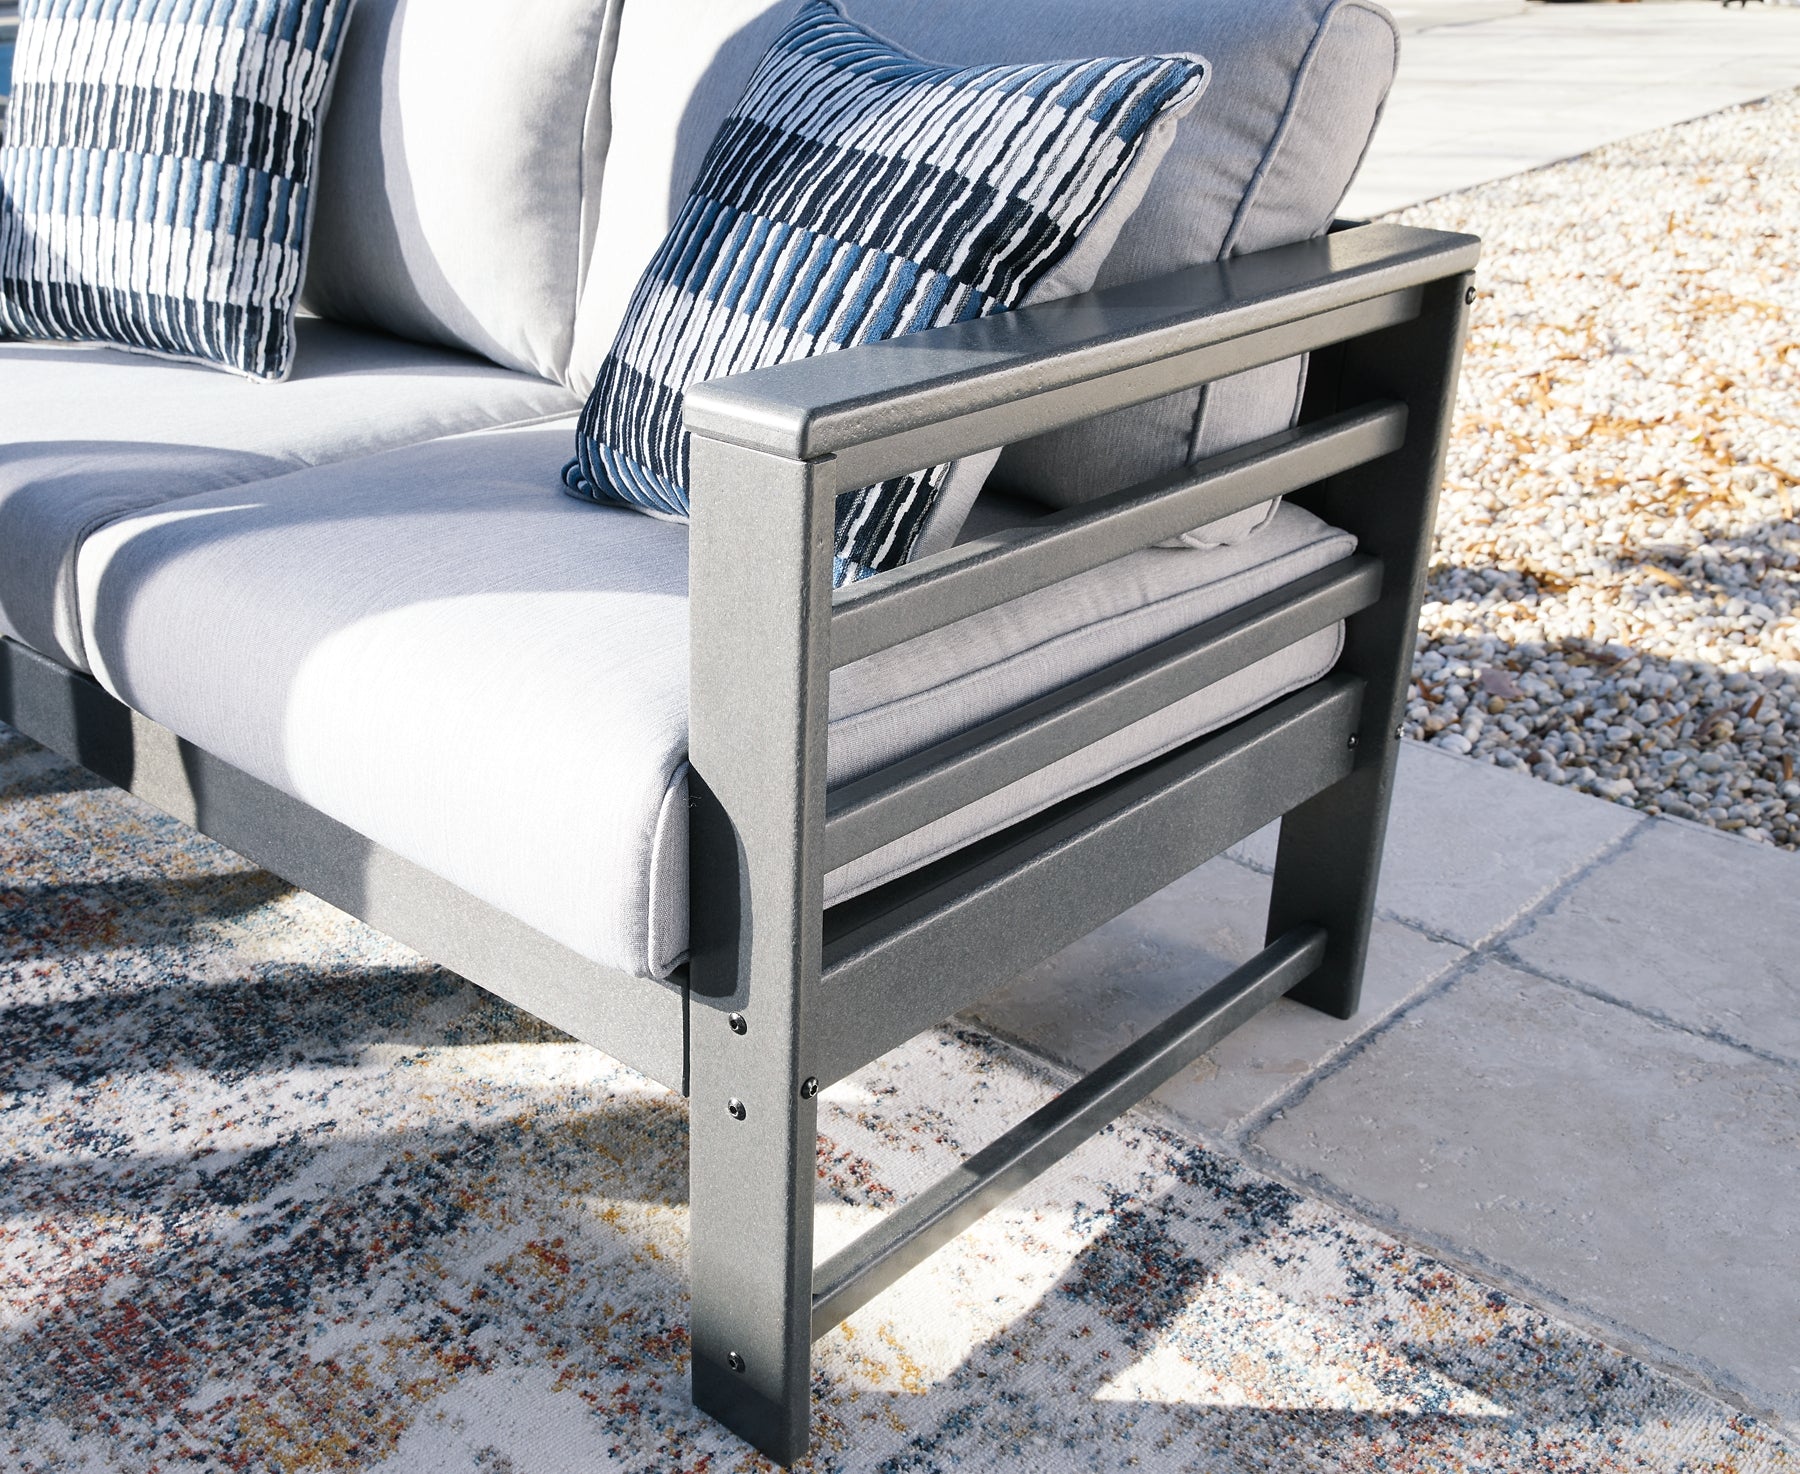 Amora Outdoor Loveseat with Coffee Table Signature Design by Ashley®